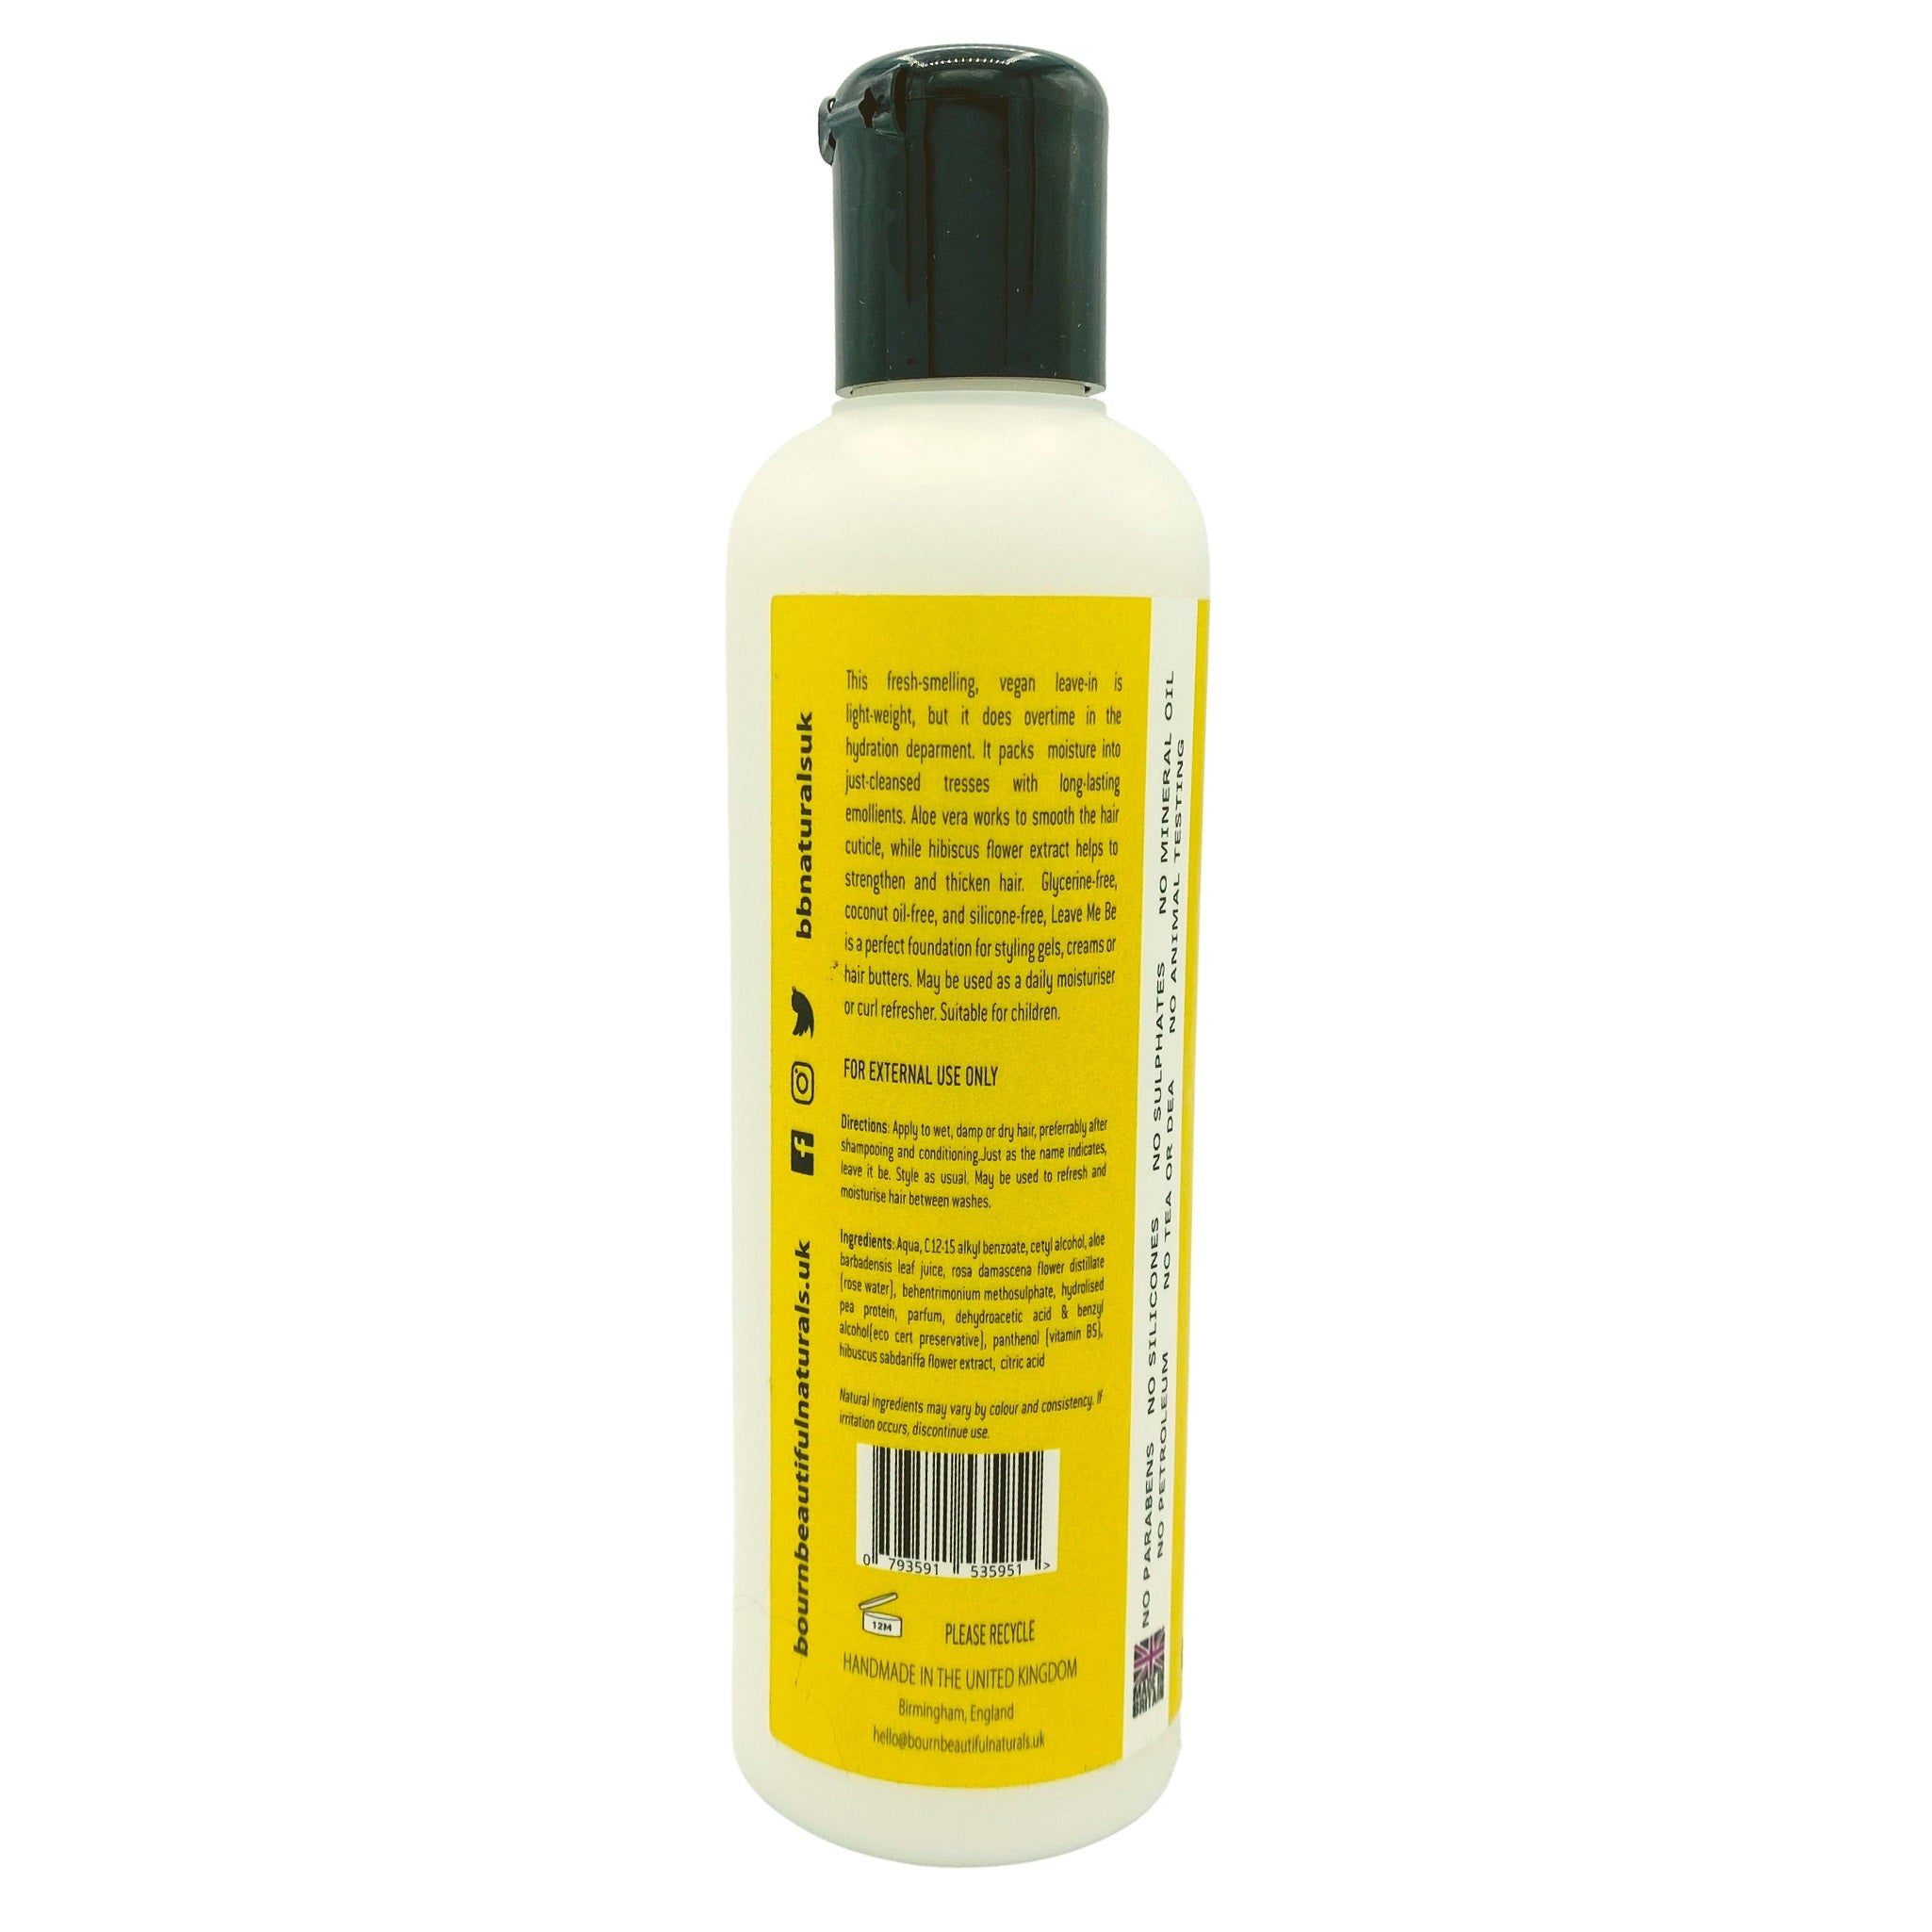  Bourn Beautiful Leave Me Be Leave-In Conditioner